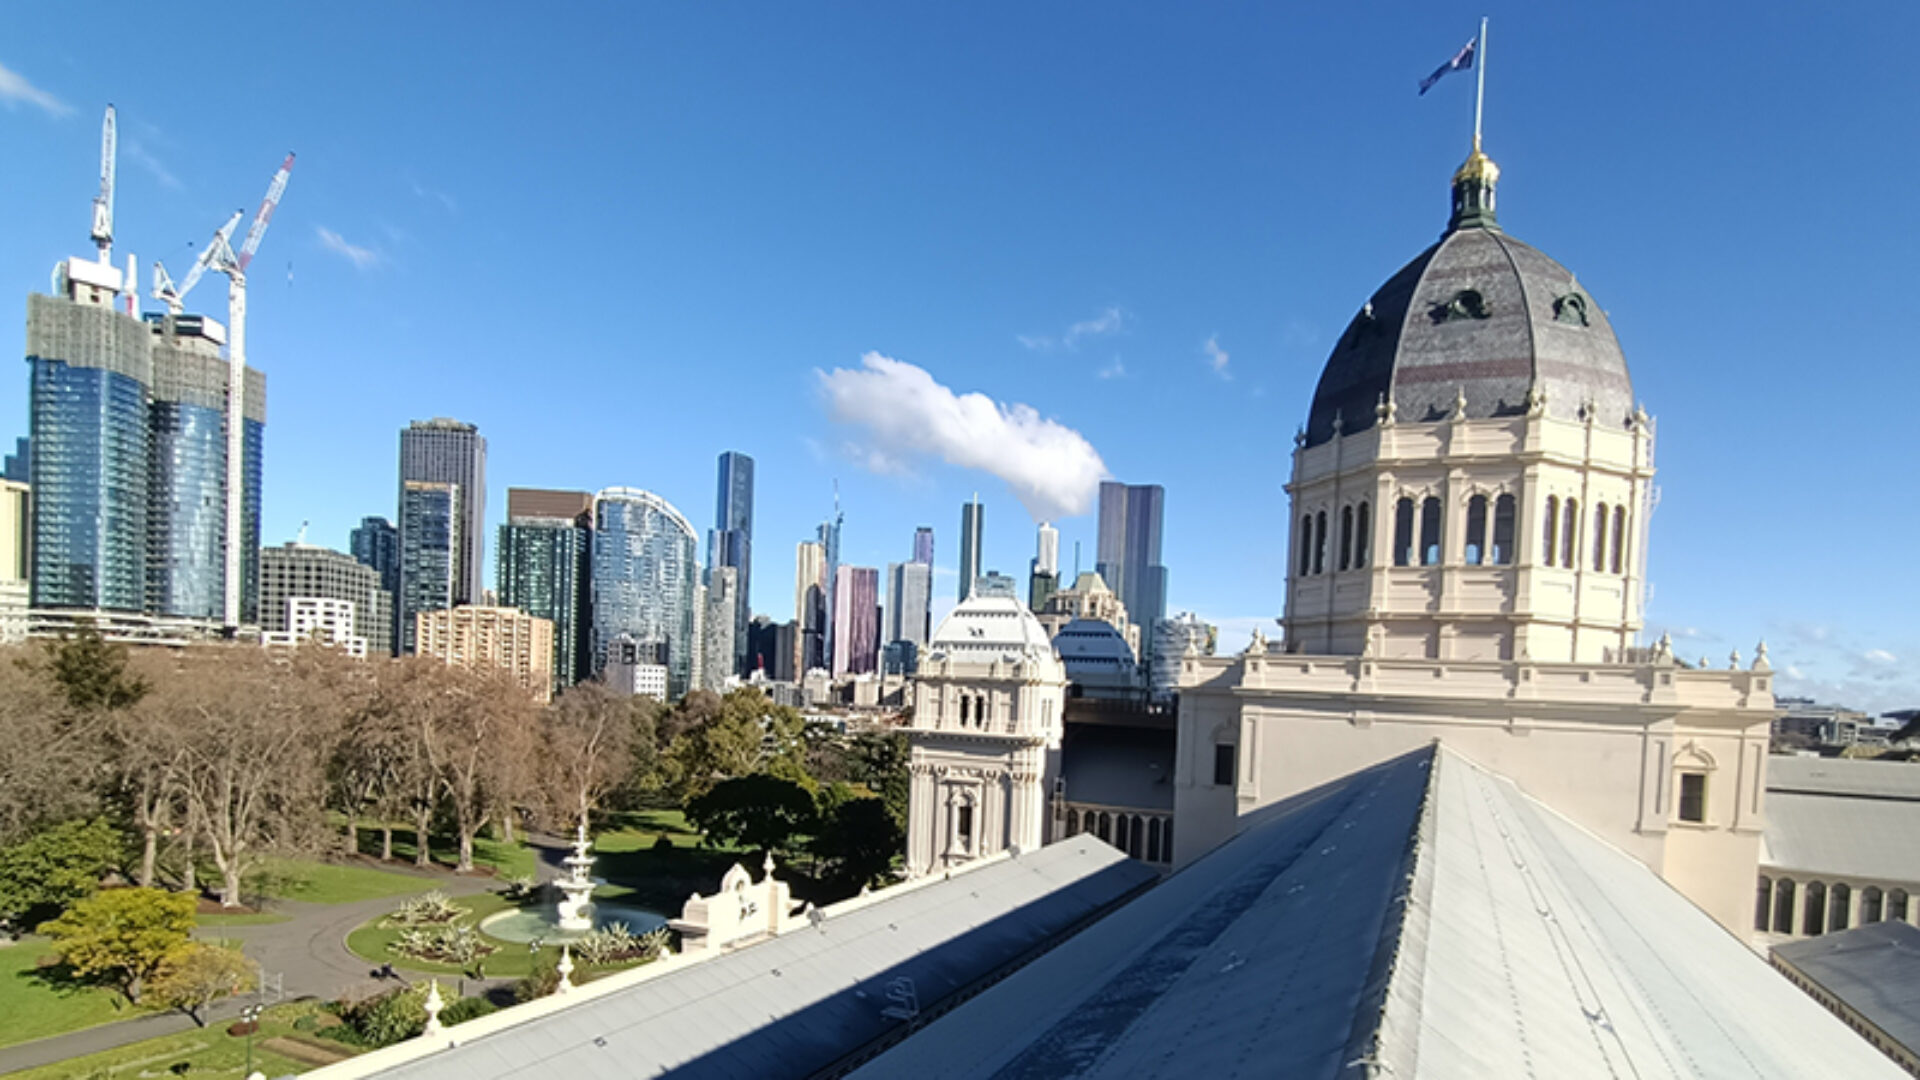 Looking across the roof of the Royal Exhibition Building towards the main dome.